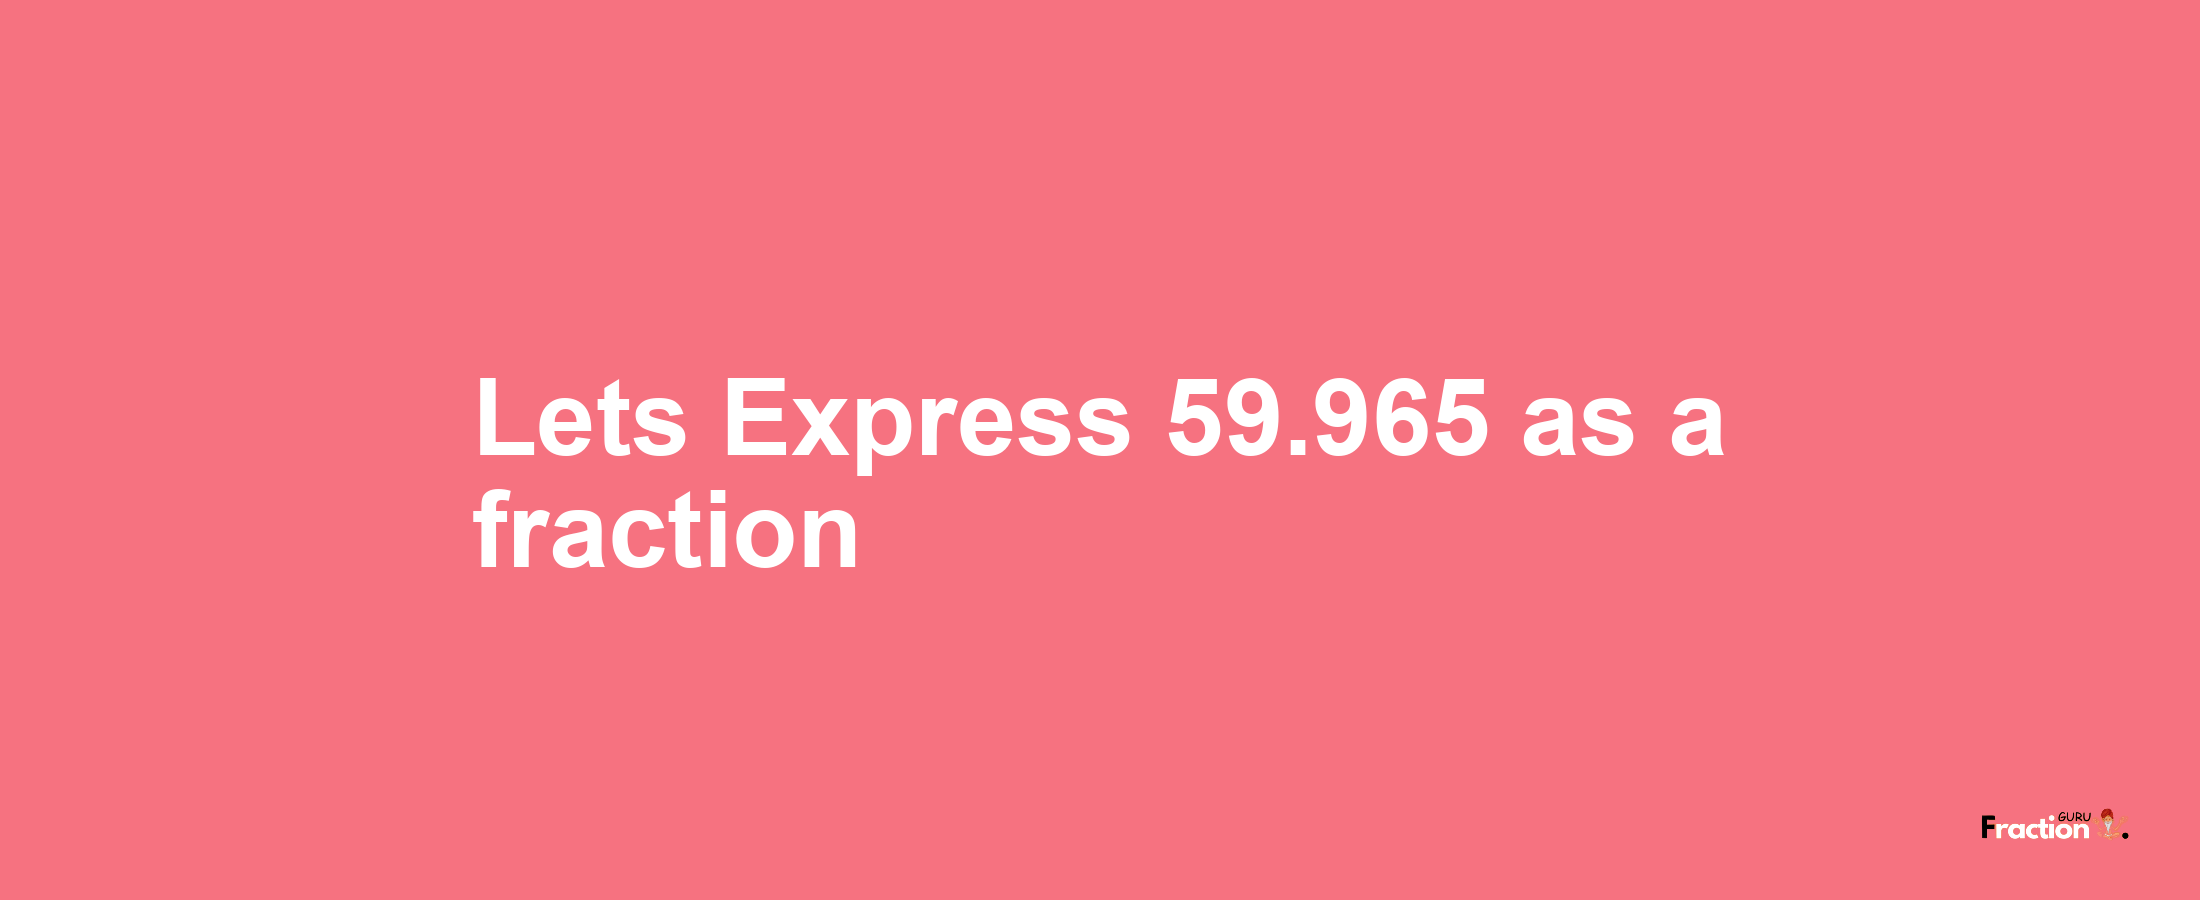 Lets Express 59.965 as afraction